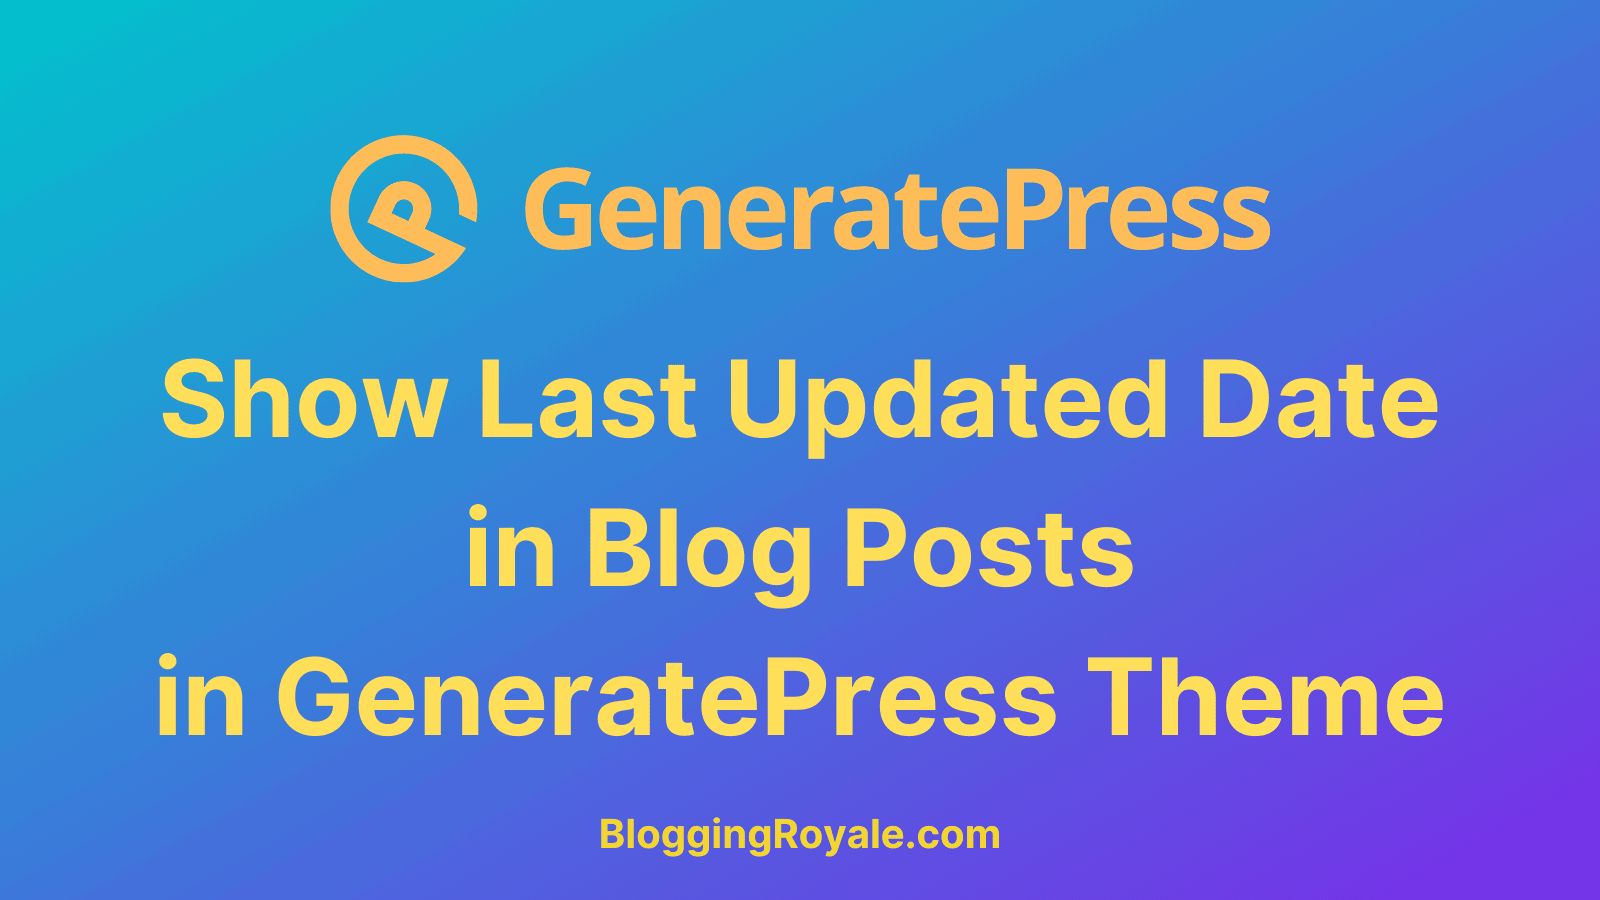 Show Last Updated Date in Blog Posts in GeneratePress Theme